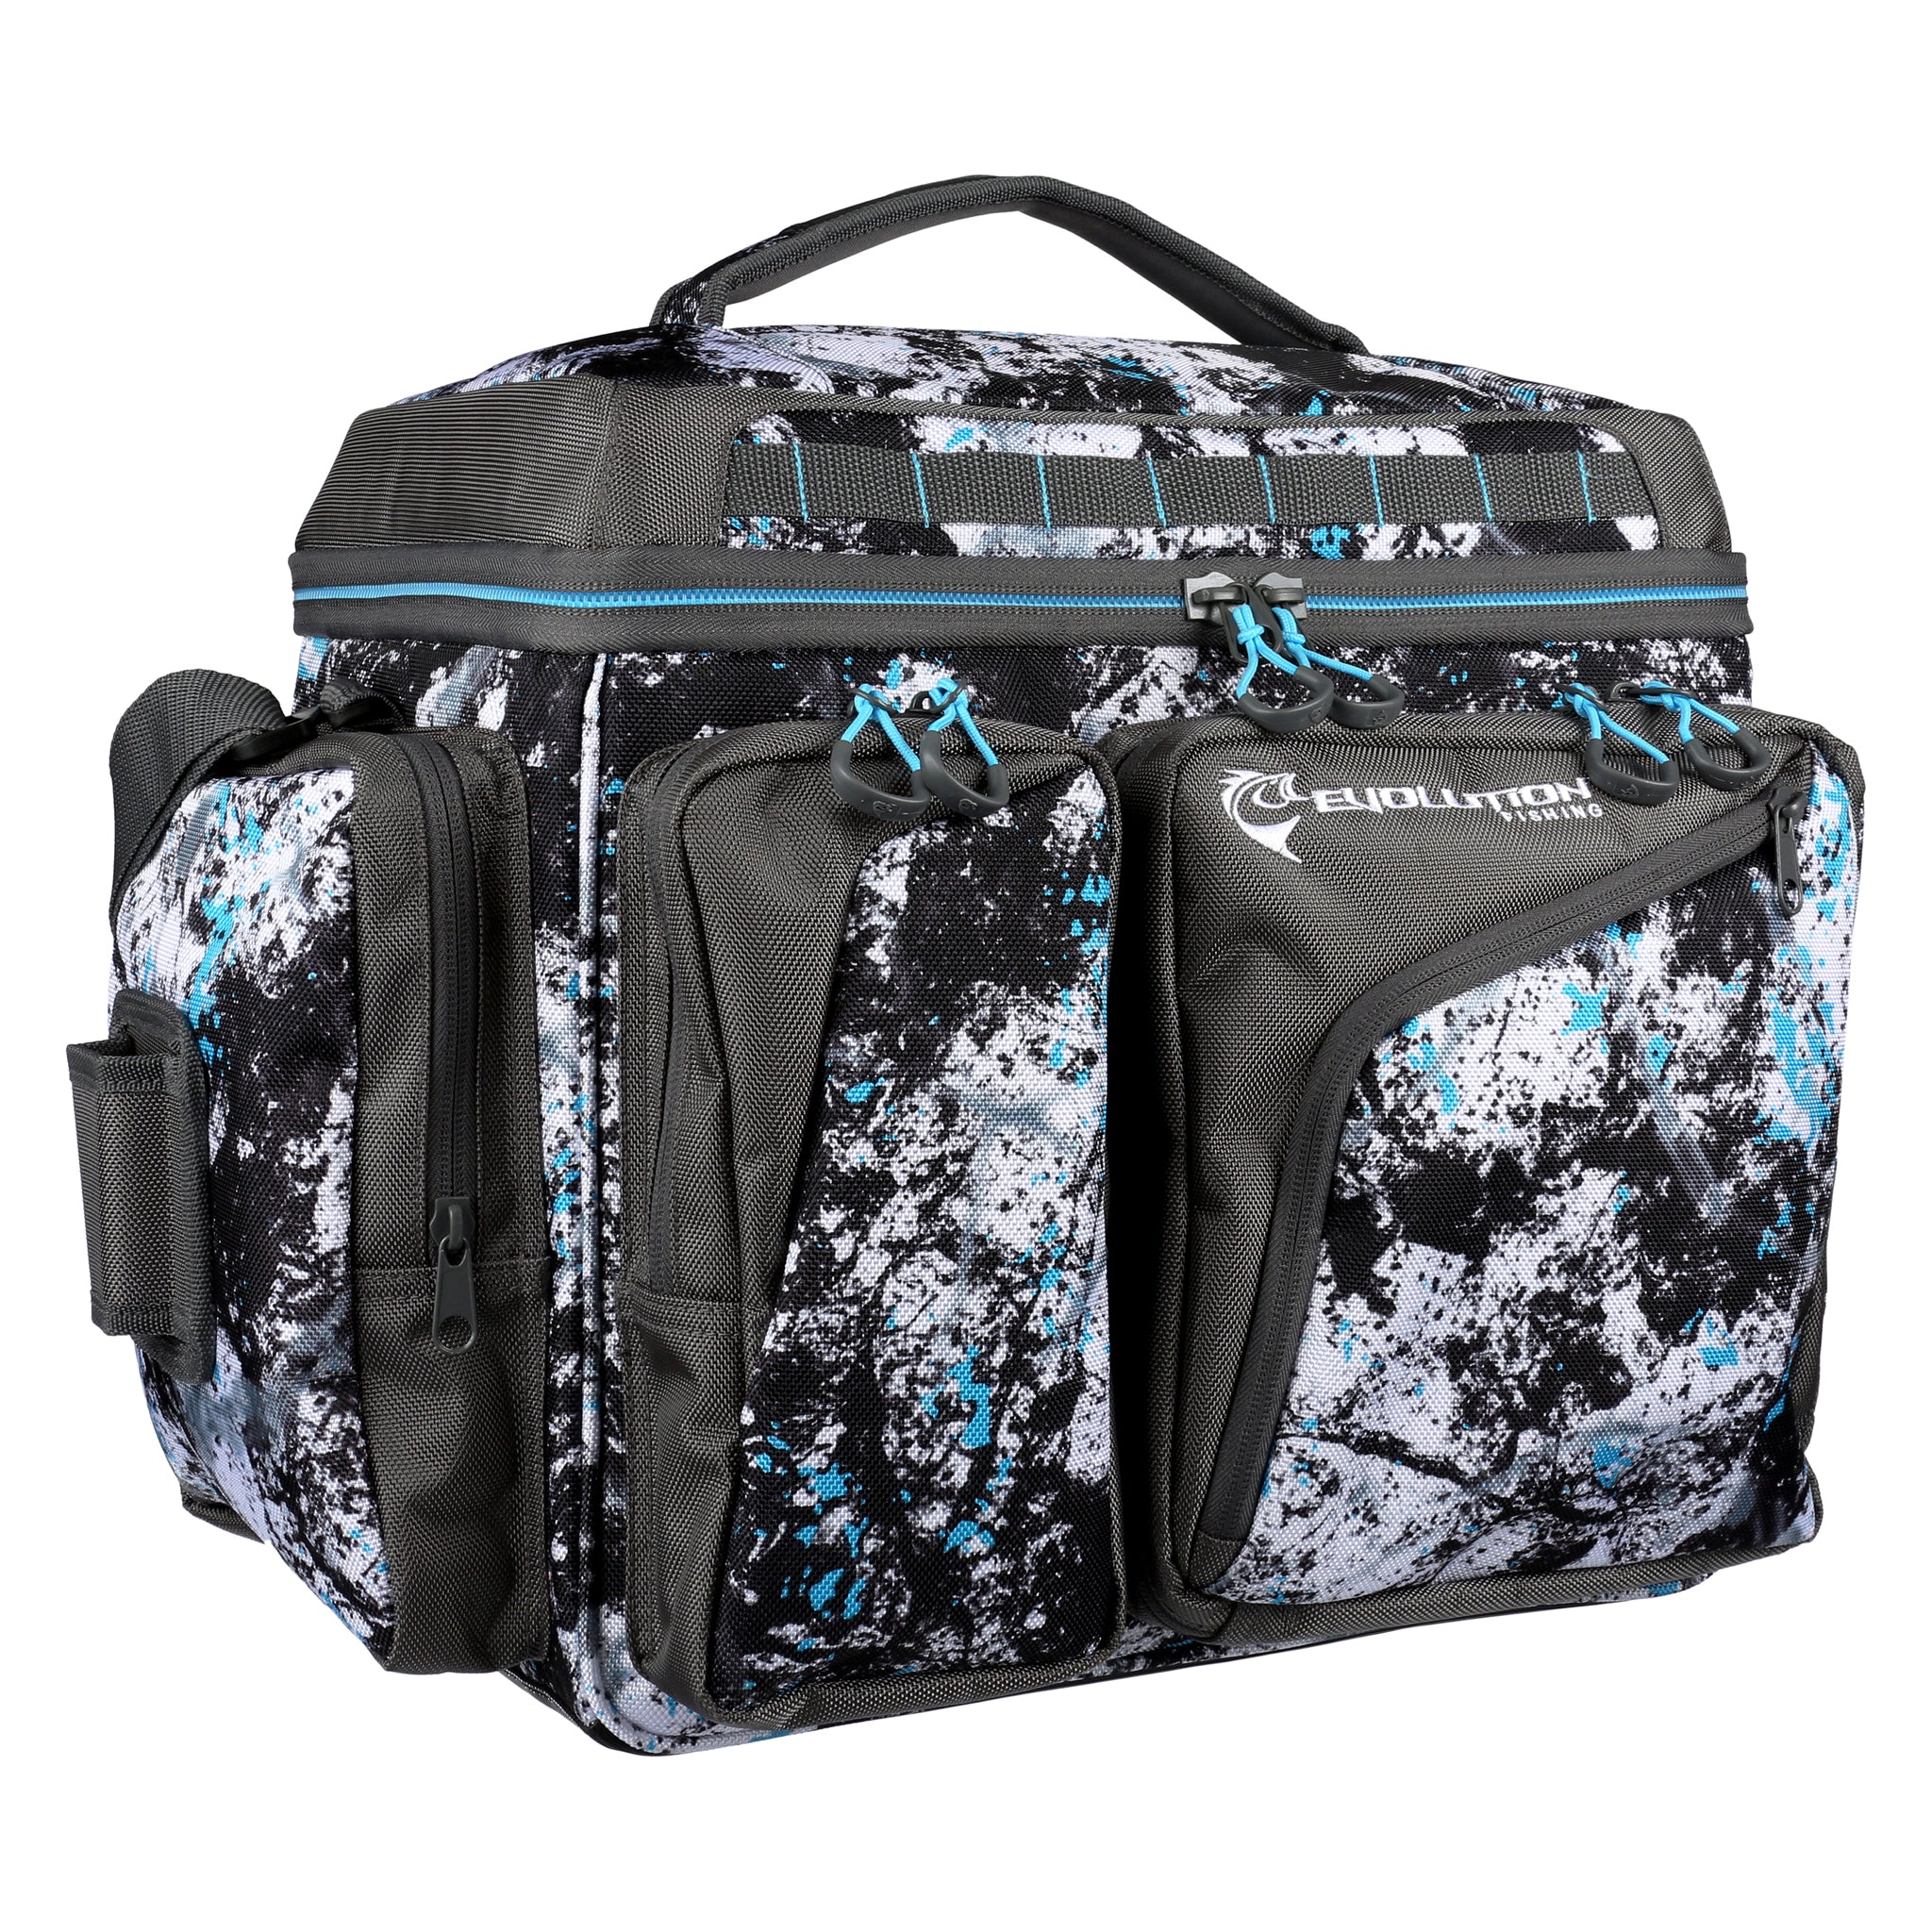 MoiShow Fishing Tackle Bag - First Impressions & REVIEW 